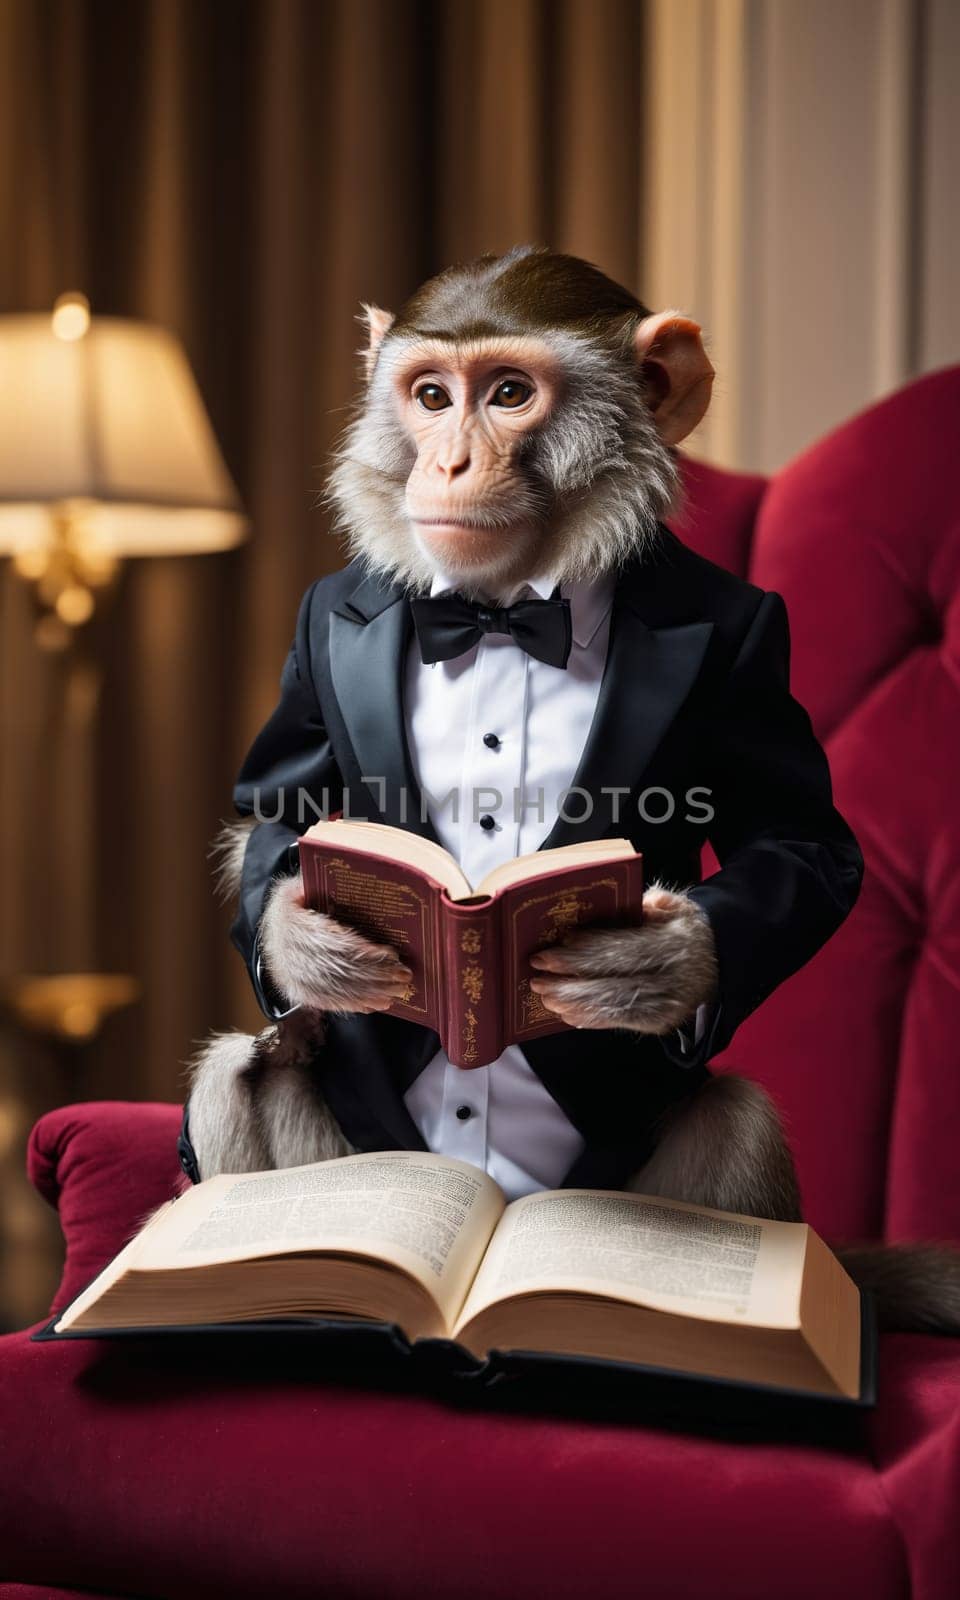 Monkey in a black suit and bow-tie reading a book.